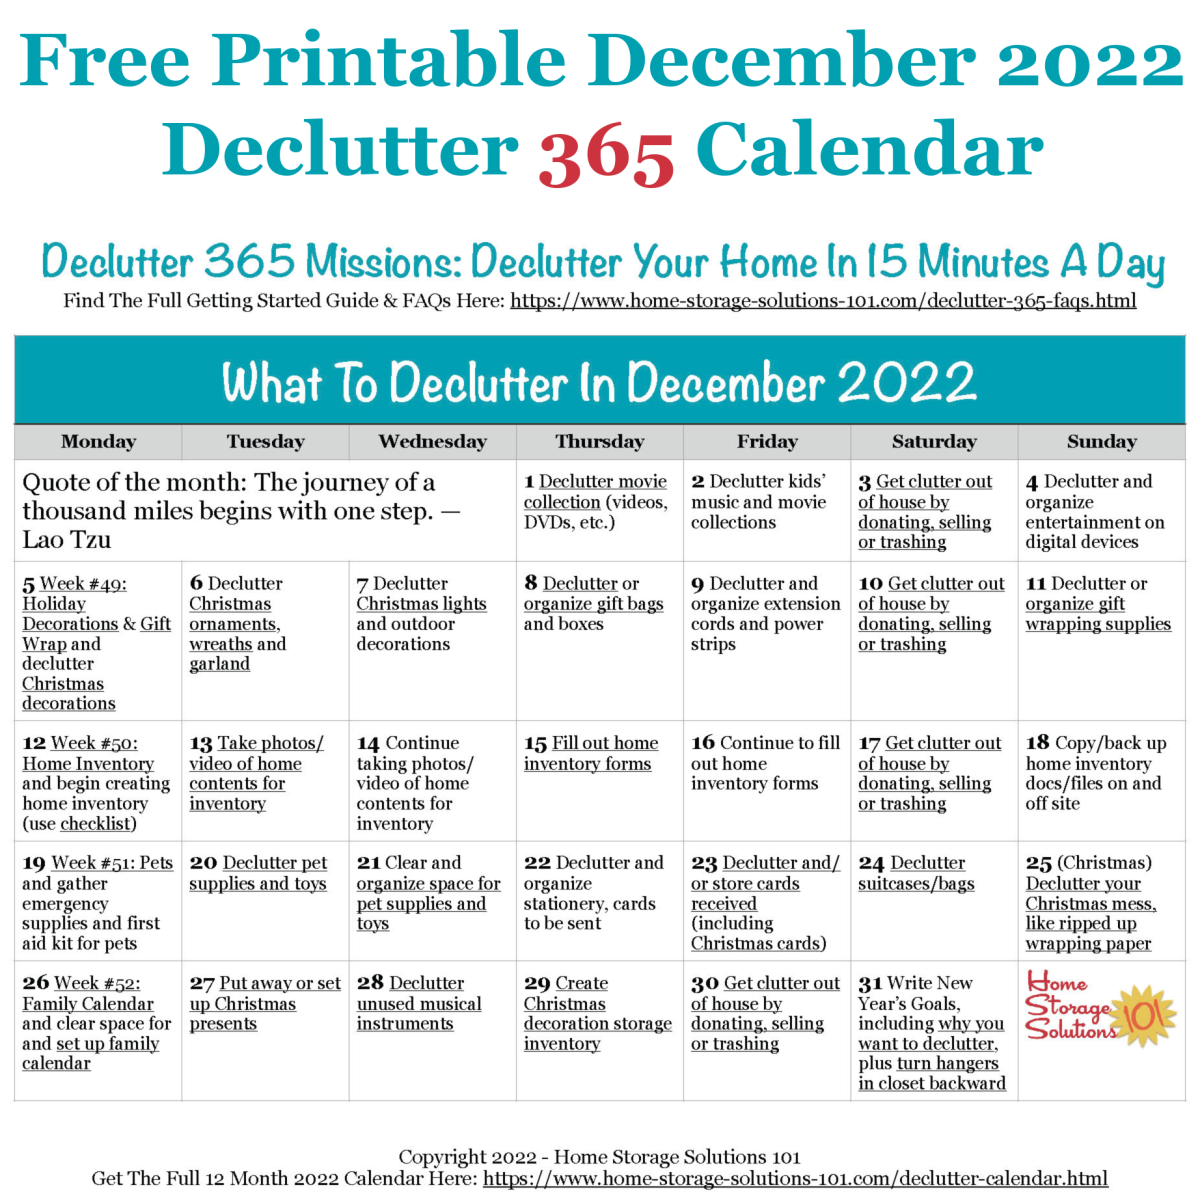 Free printable December 2022 #decluttering calendar with daily 15 minute missions. Follow the entire #Declutter365 plan provided by Home Storage Solutions 101 to #declutter your whole house in a year.